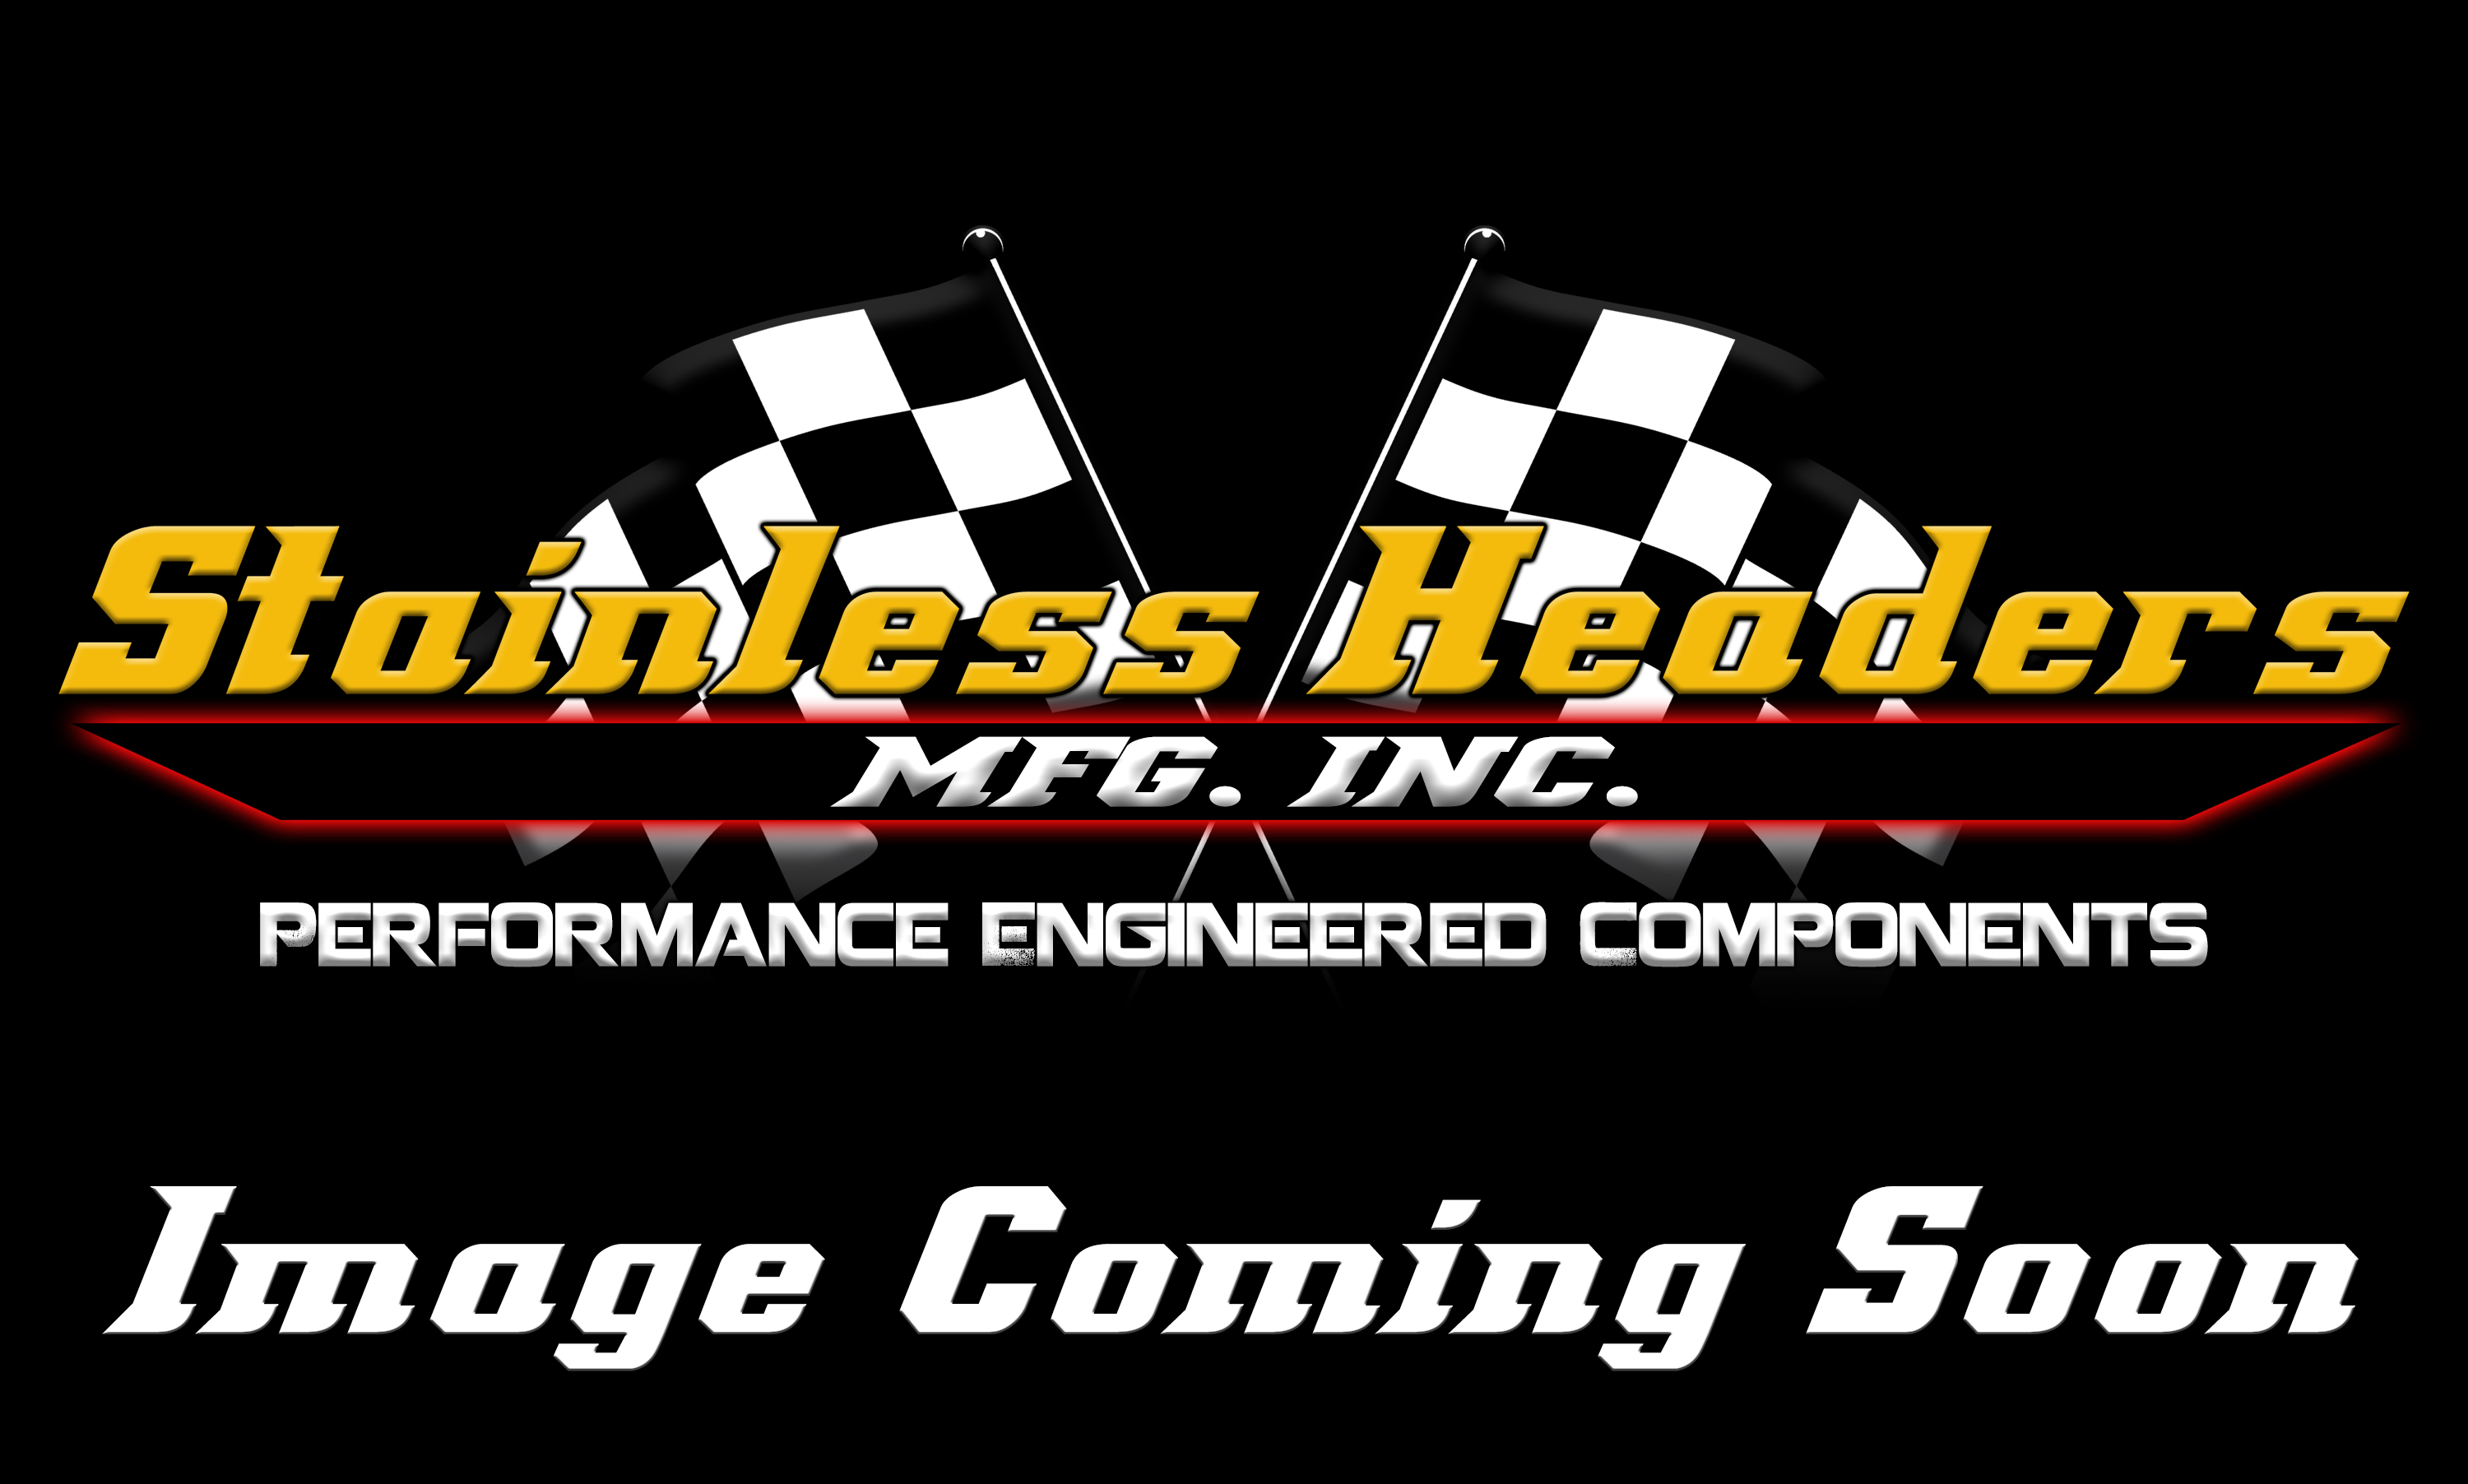 Custom Header Components - Merge Collectors - Stainless Headers - 1 1/2" Primary 3 into 1 Performance Merge Collector-16ga Mild Steel